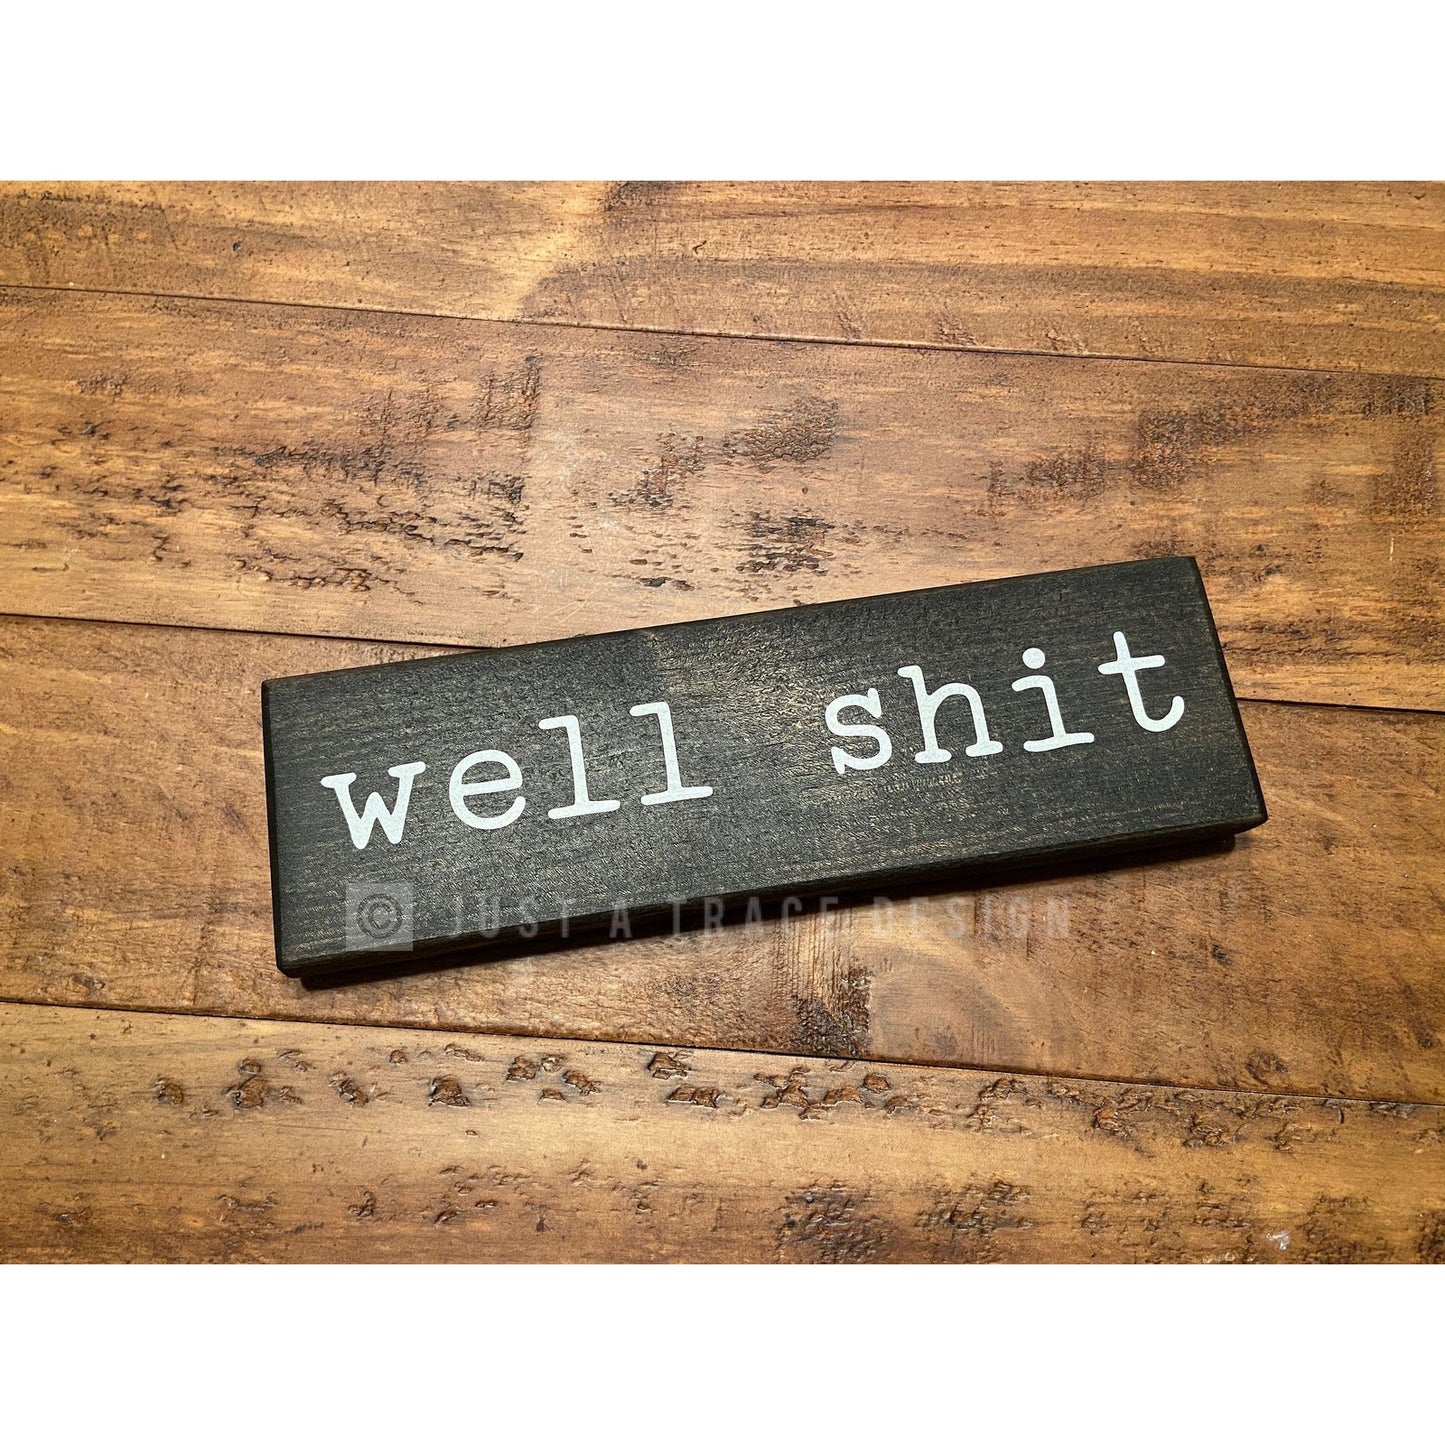 Well Shit Sign - Funny Sign - Shelf Sitter - 8" x 2.25"